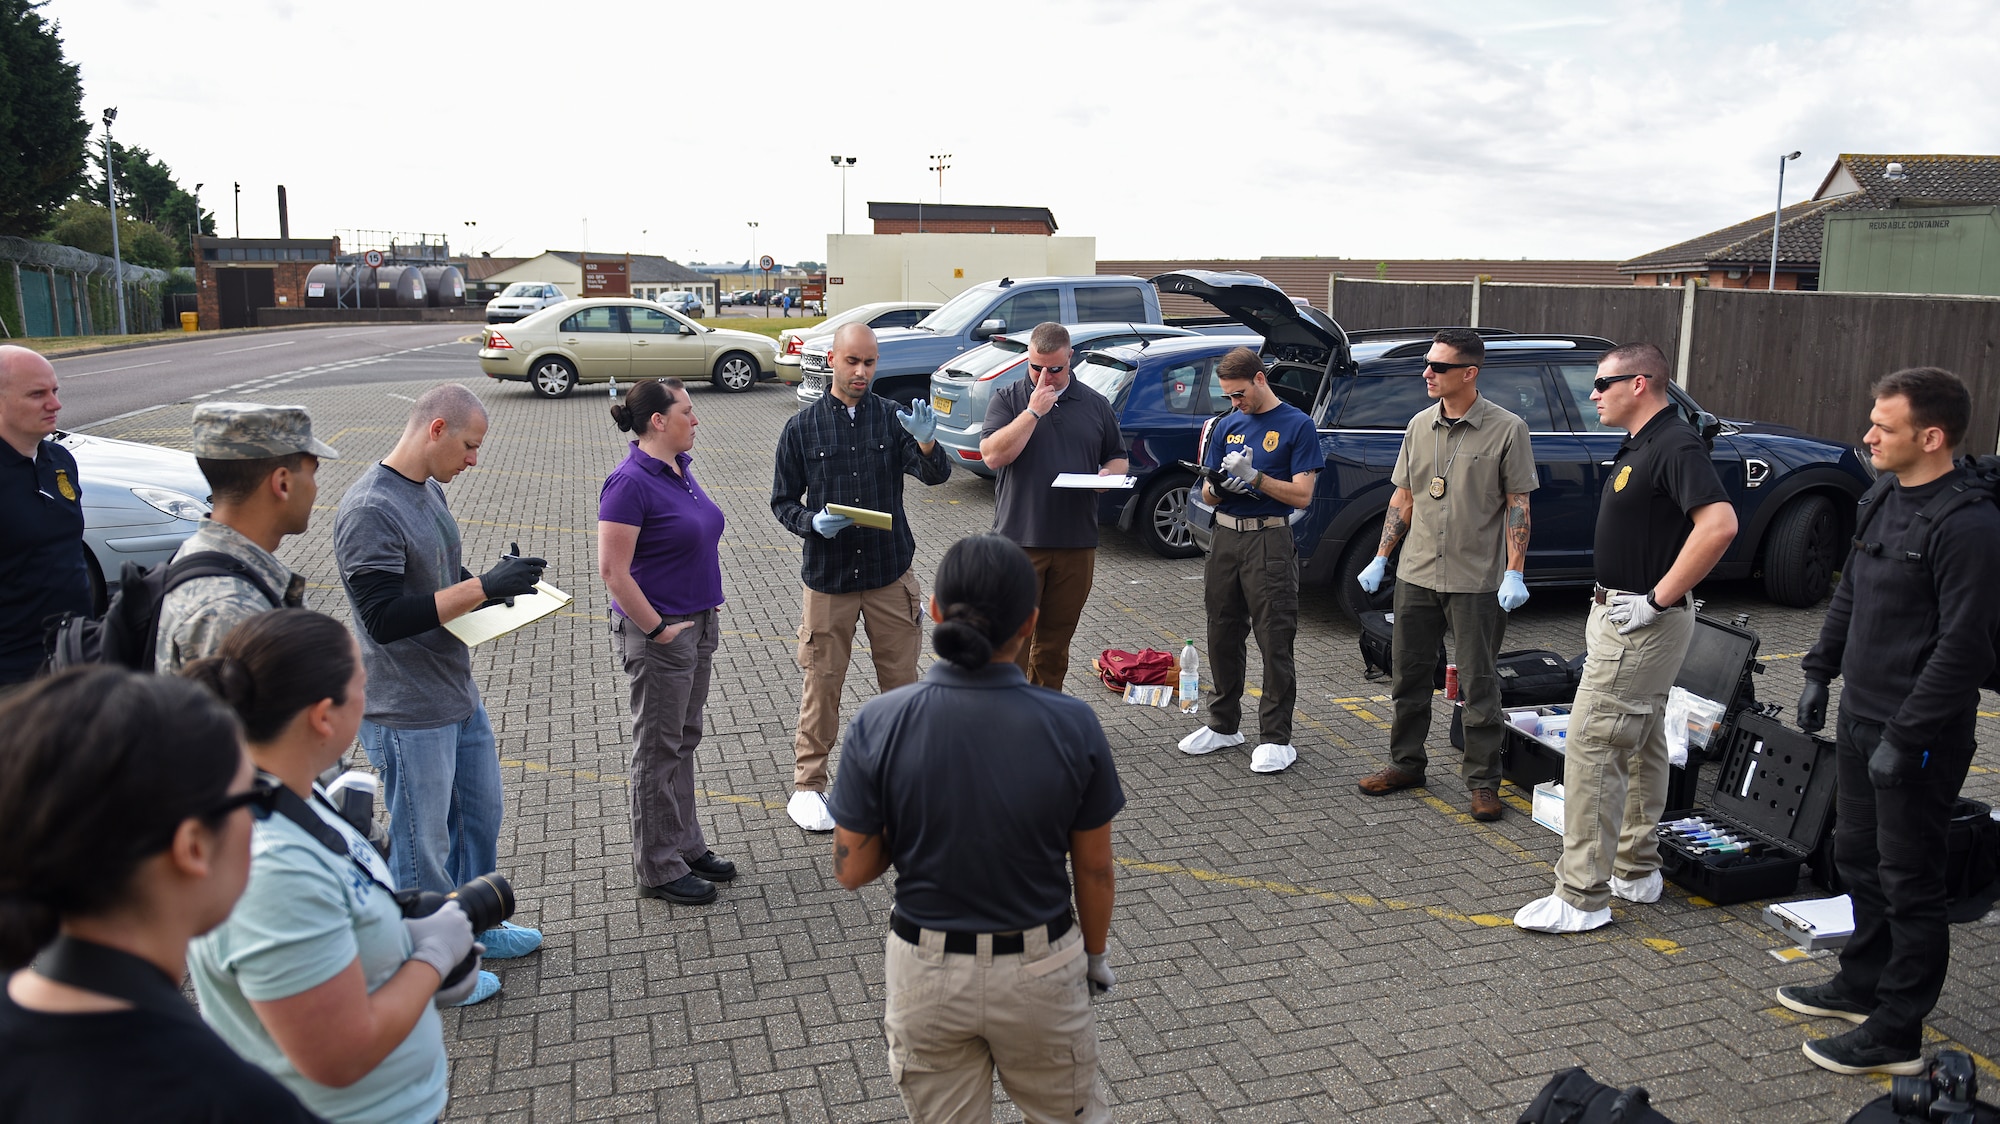 U.S. Air Force Special Agent Mark Stuetzel, Air Force Office of Special Investigations Detachment 512, briefs Airmen during crime scene investigation processing training session at RAF Mildenhall, England, Aug. 1, 2018. This was the first time the three agencies came together to conduct crime scene investigation training at RAF Mildenhall. (U.S. Air Force photo by Senior Airman Luke Milano)